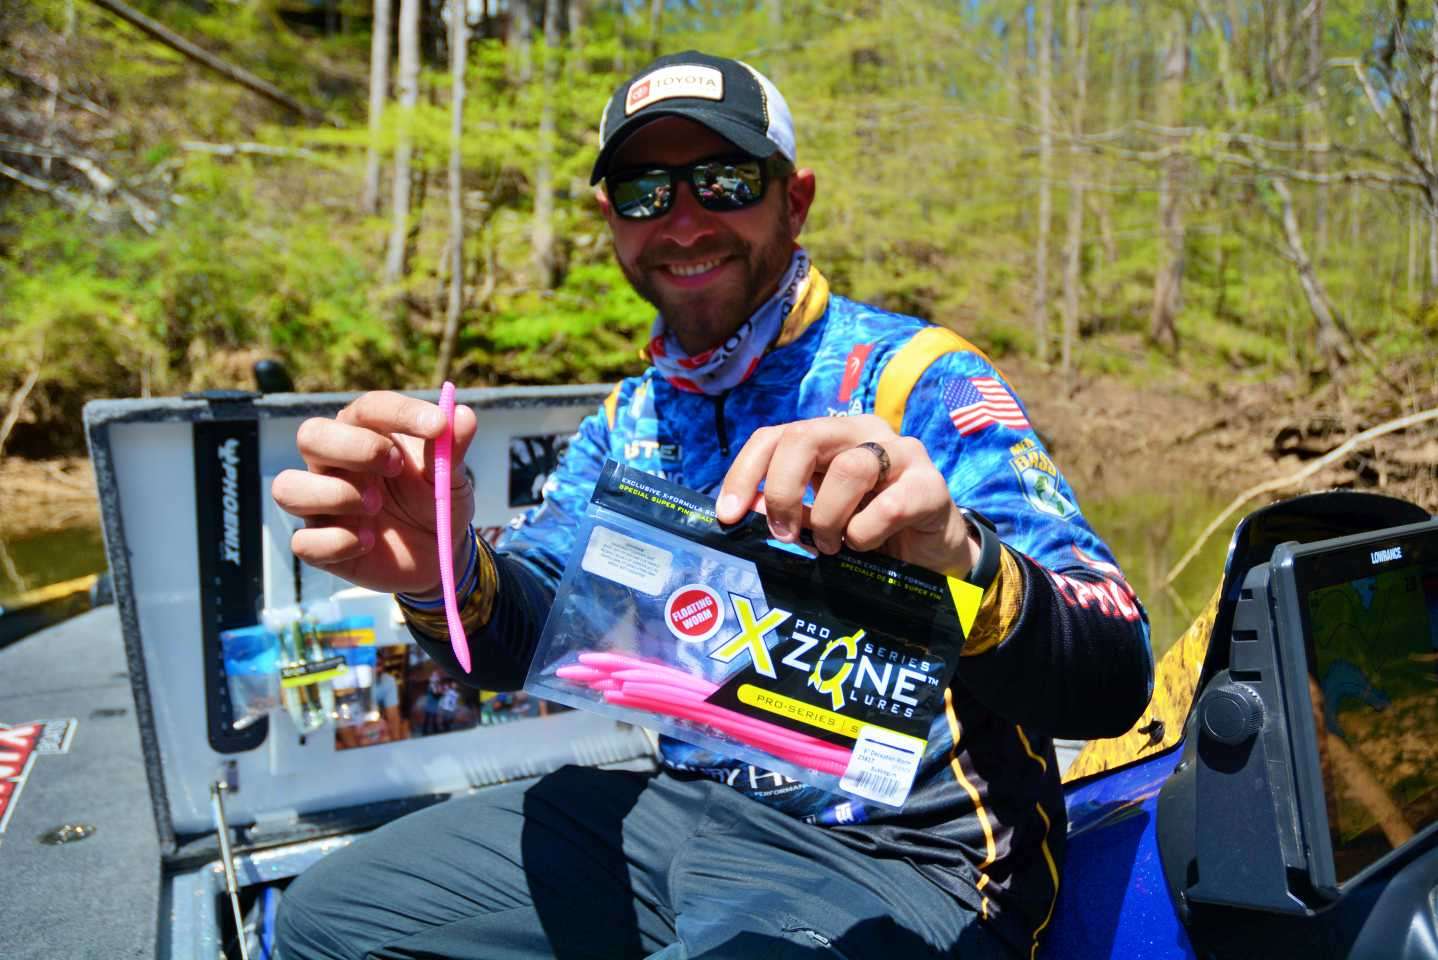 Lester re-rigs with his favorite setup. Itâs an X Zone Lures Deception Worm. 